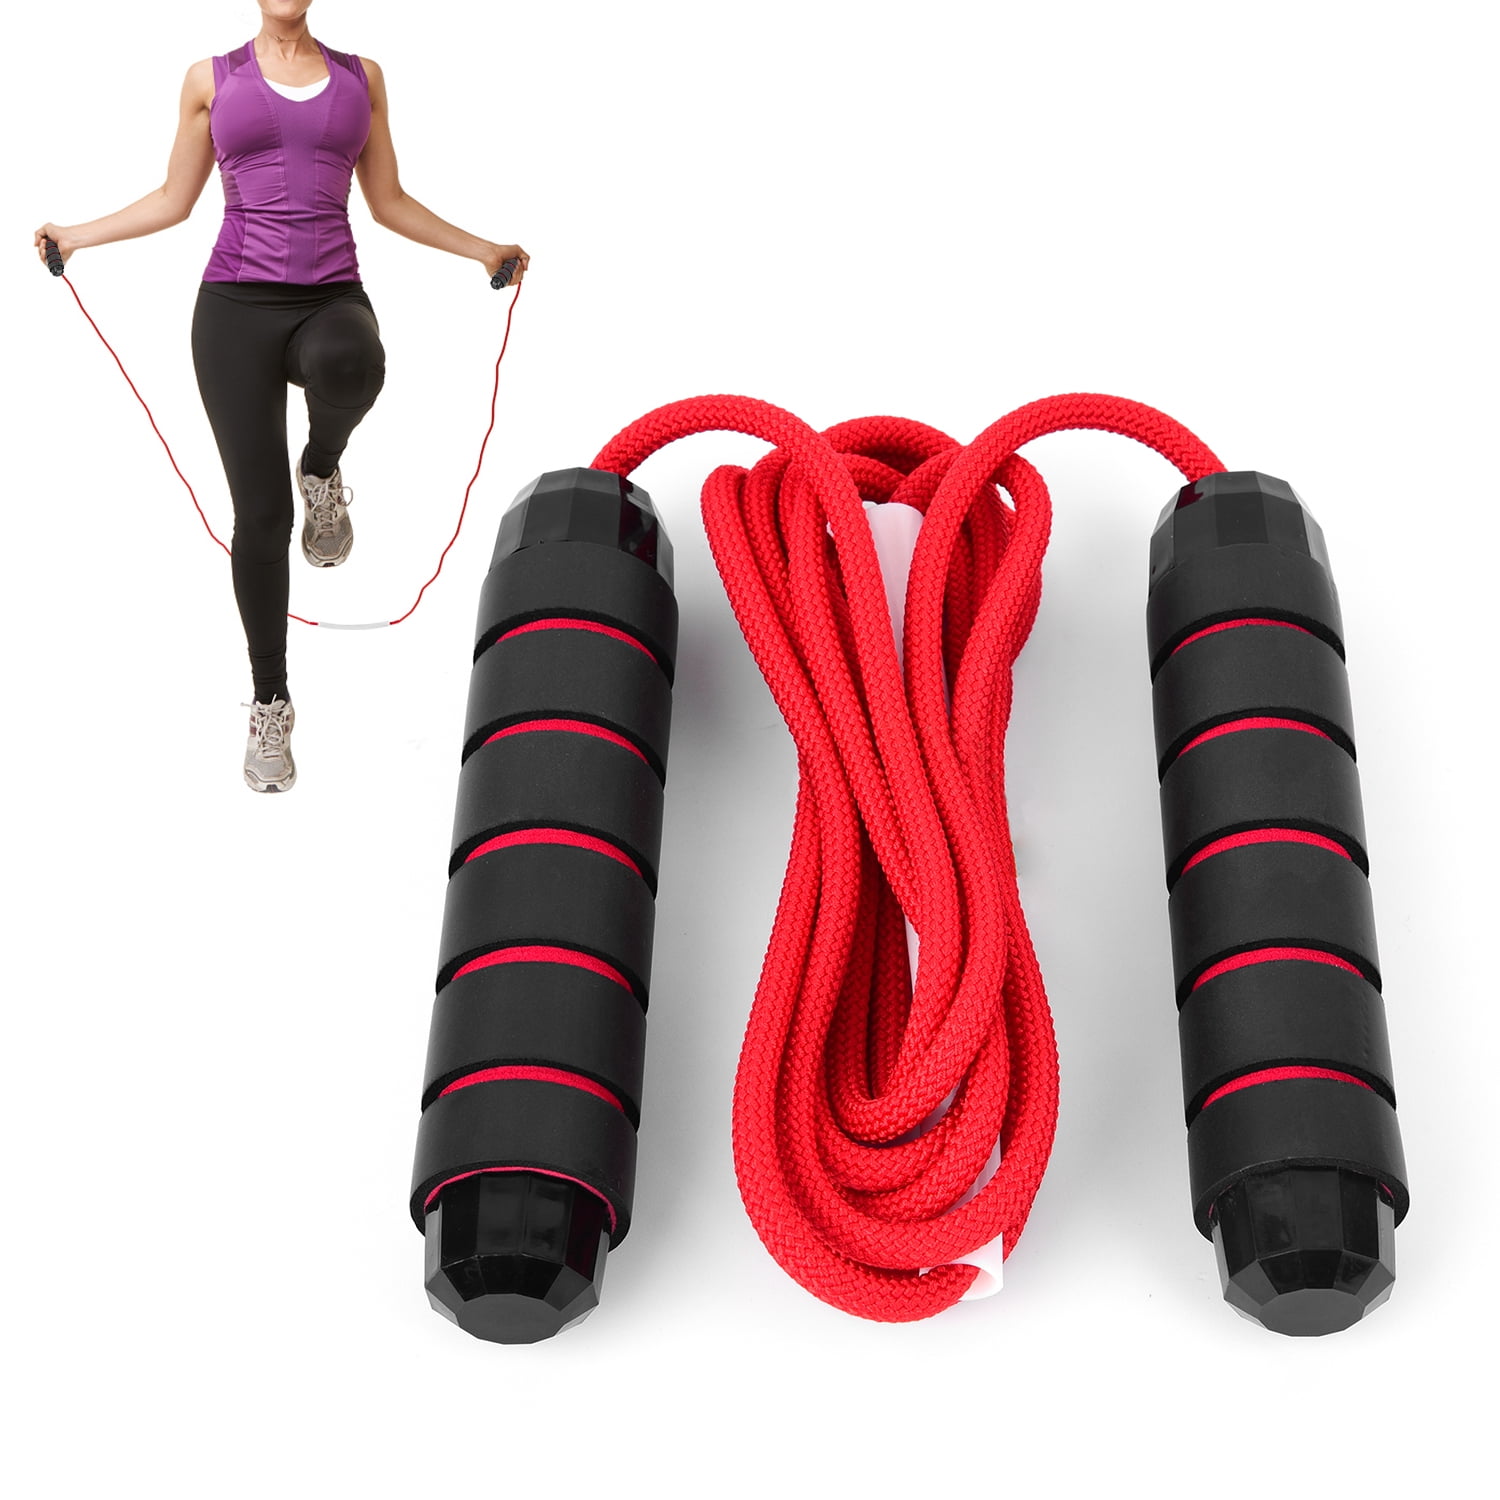 Anti slip Grip Handles Jump Ropes for fitness Lightweight & Adjustable Skipping Rope for Men,women and kids Speed Jump Ropes for fitness Crossfit-10 Feet 2PCS in Safe bag Home Workout 